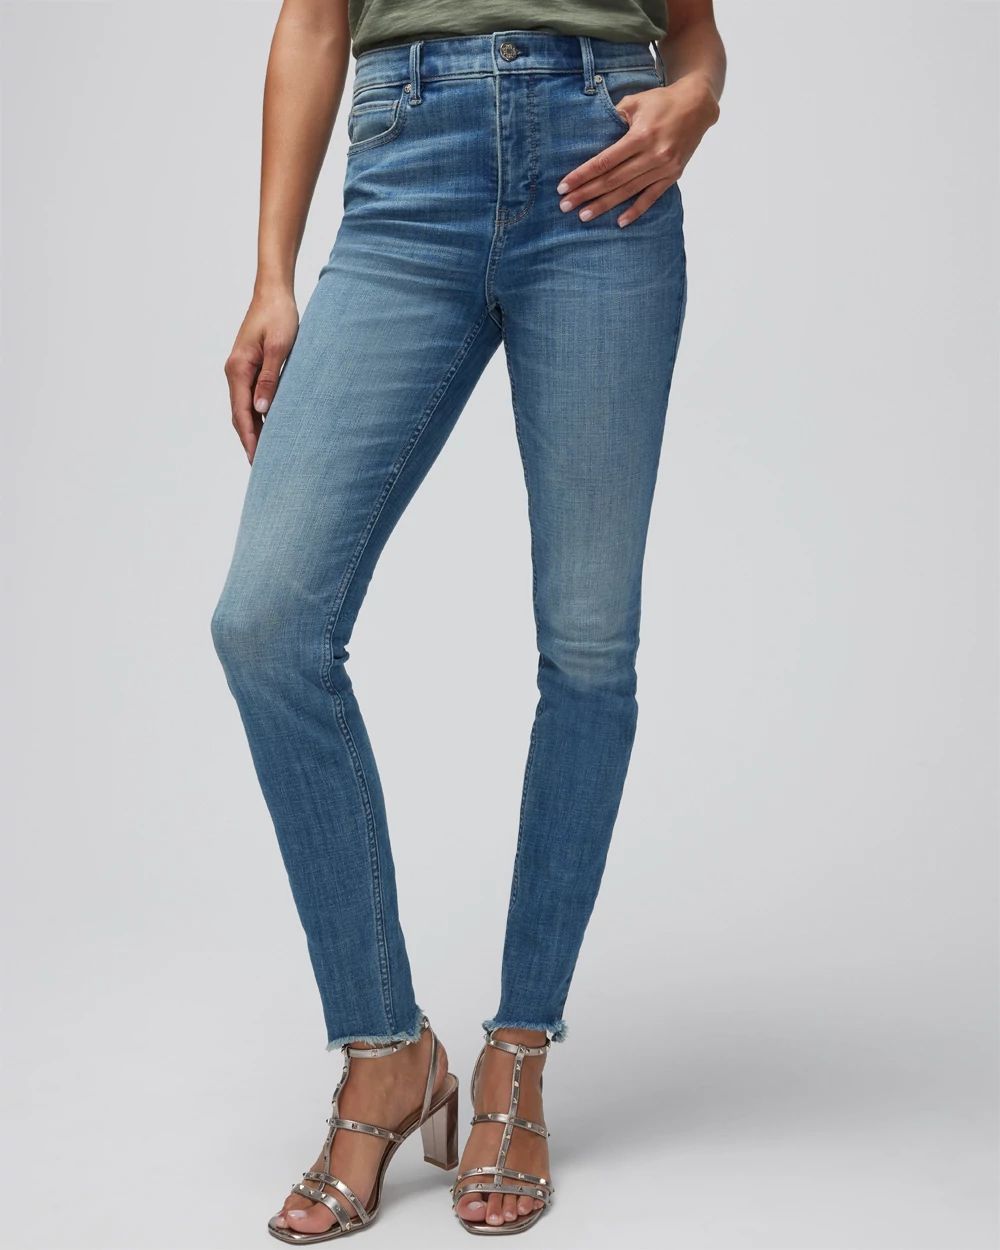 Extra High-Rise Everyday Soft Denim  Skinny Ankle Jeans click to view larger image.